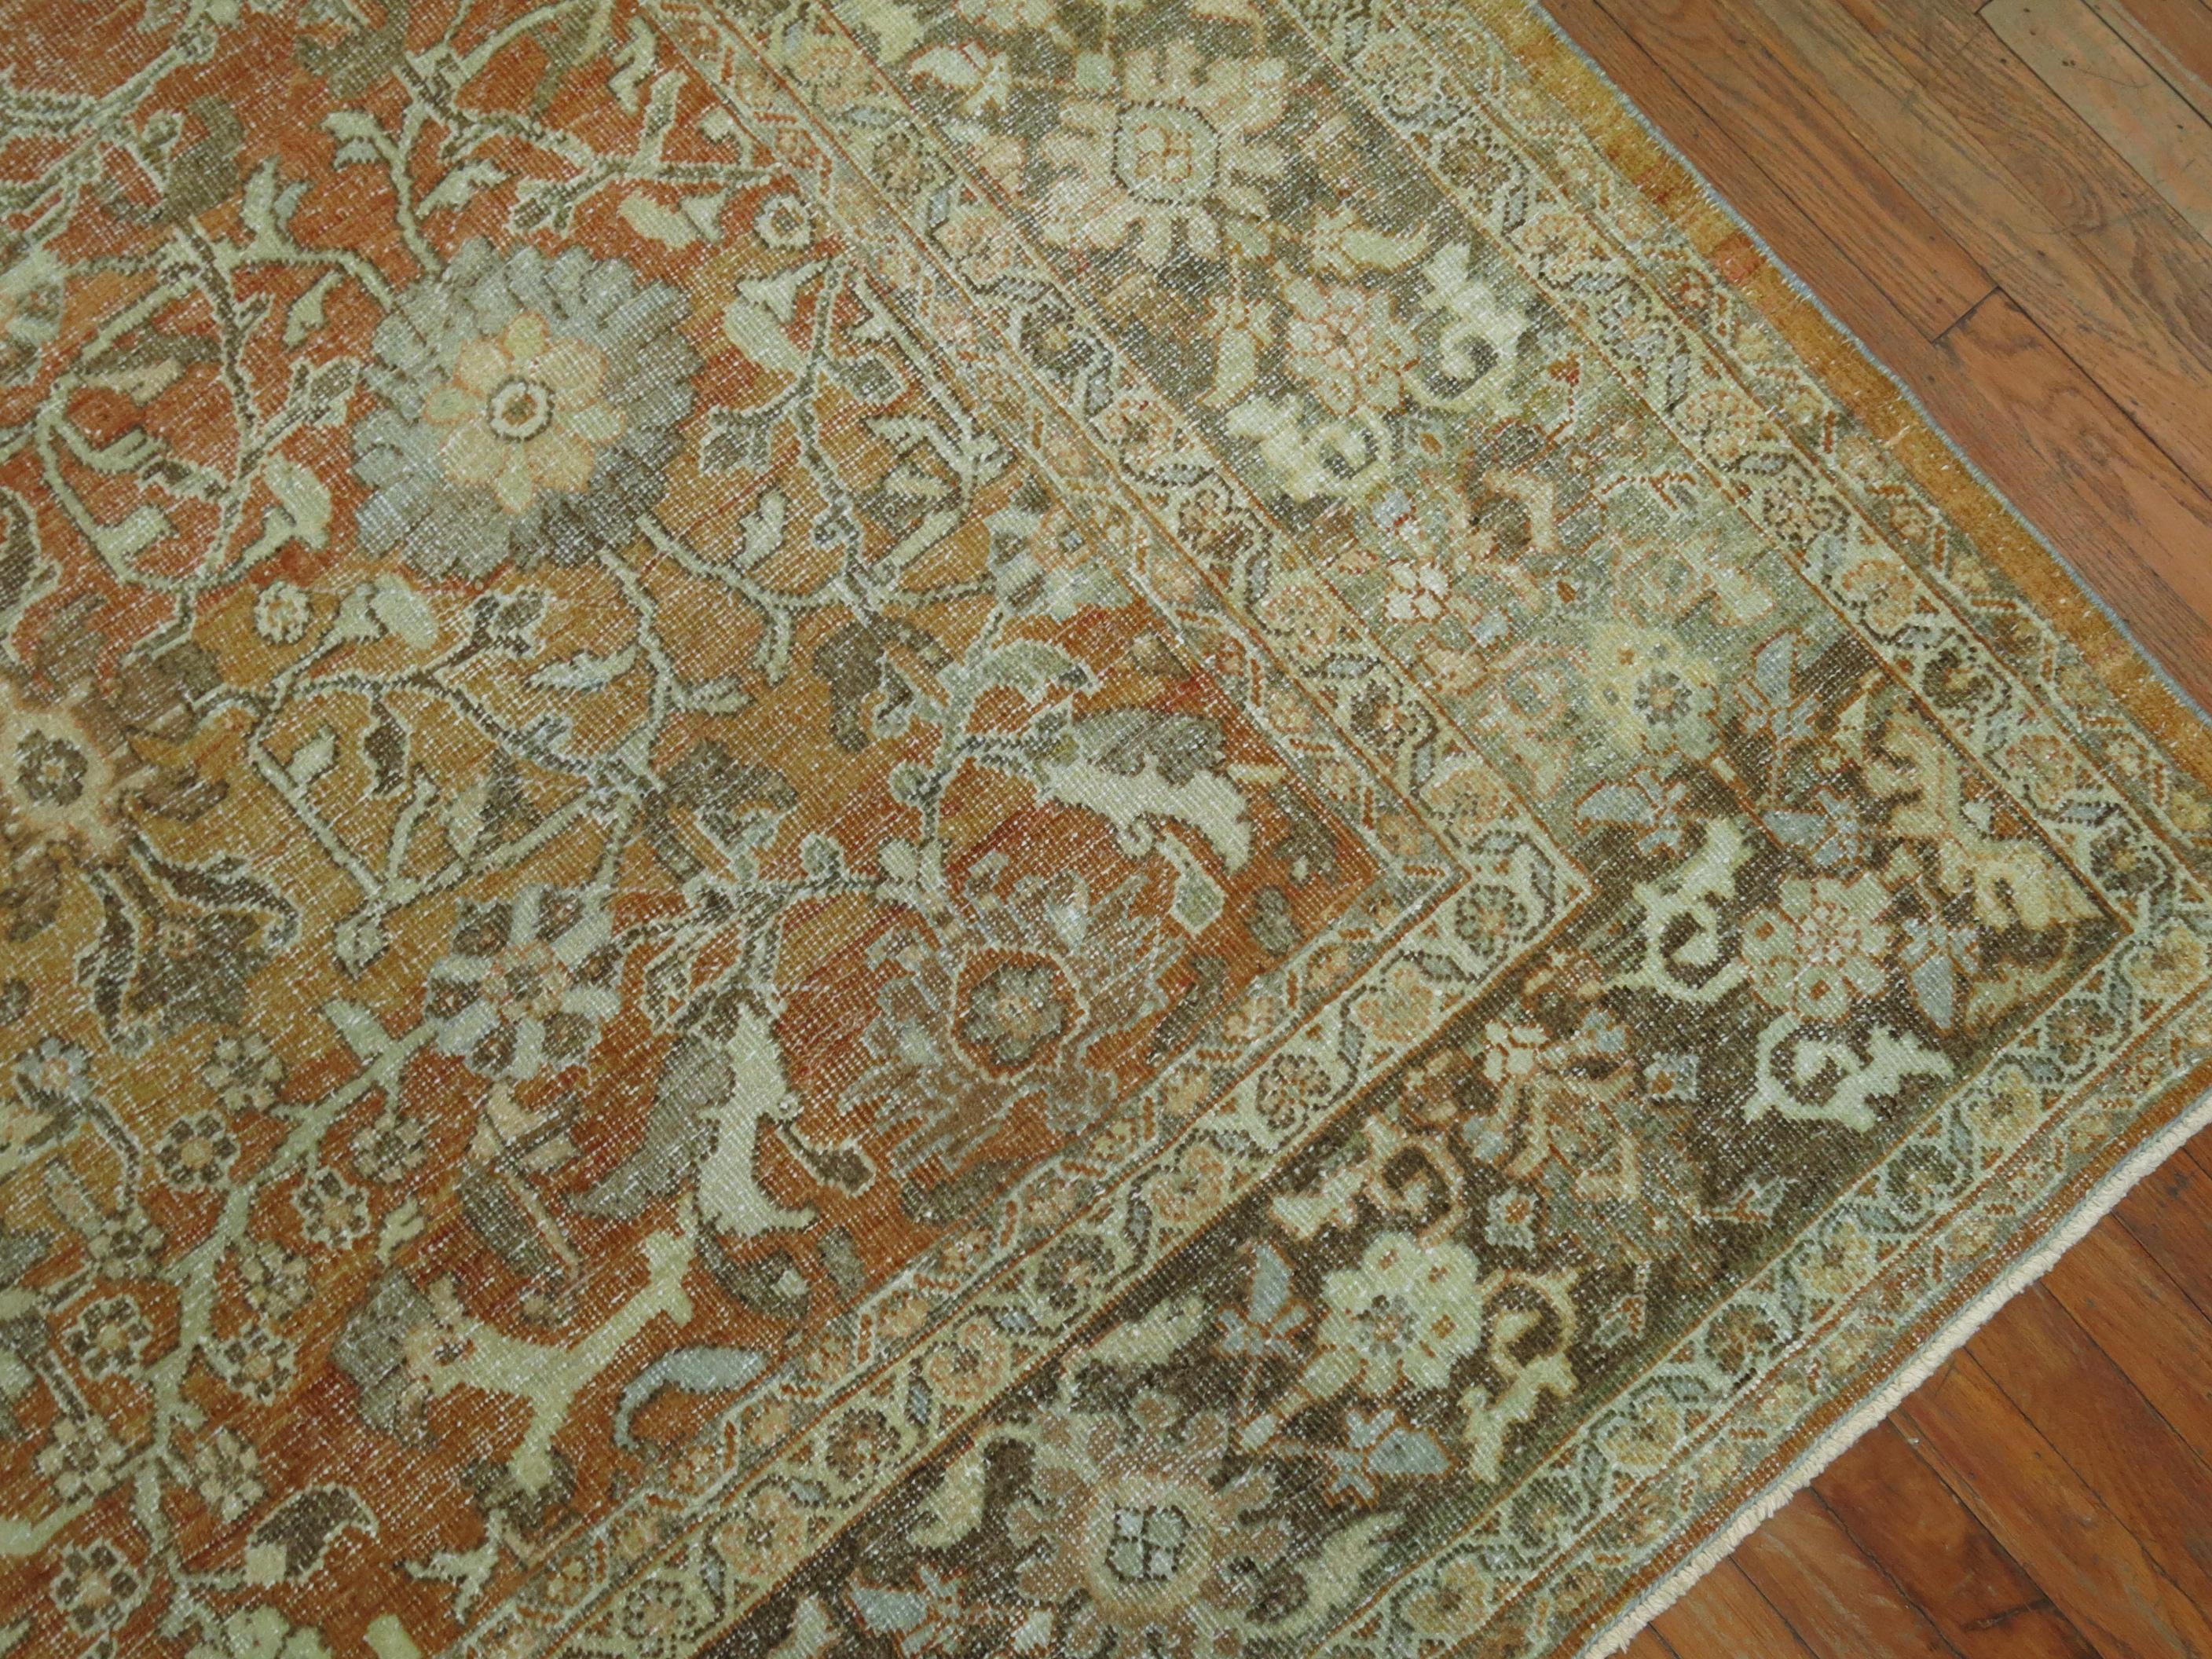 Terracotta Traditional Persian Room Size Decorative Hand-Woven Rug In Distressed Condition In New York, NY